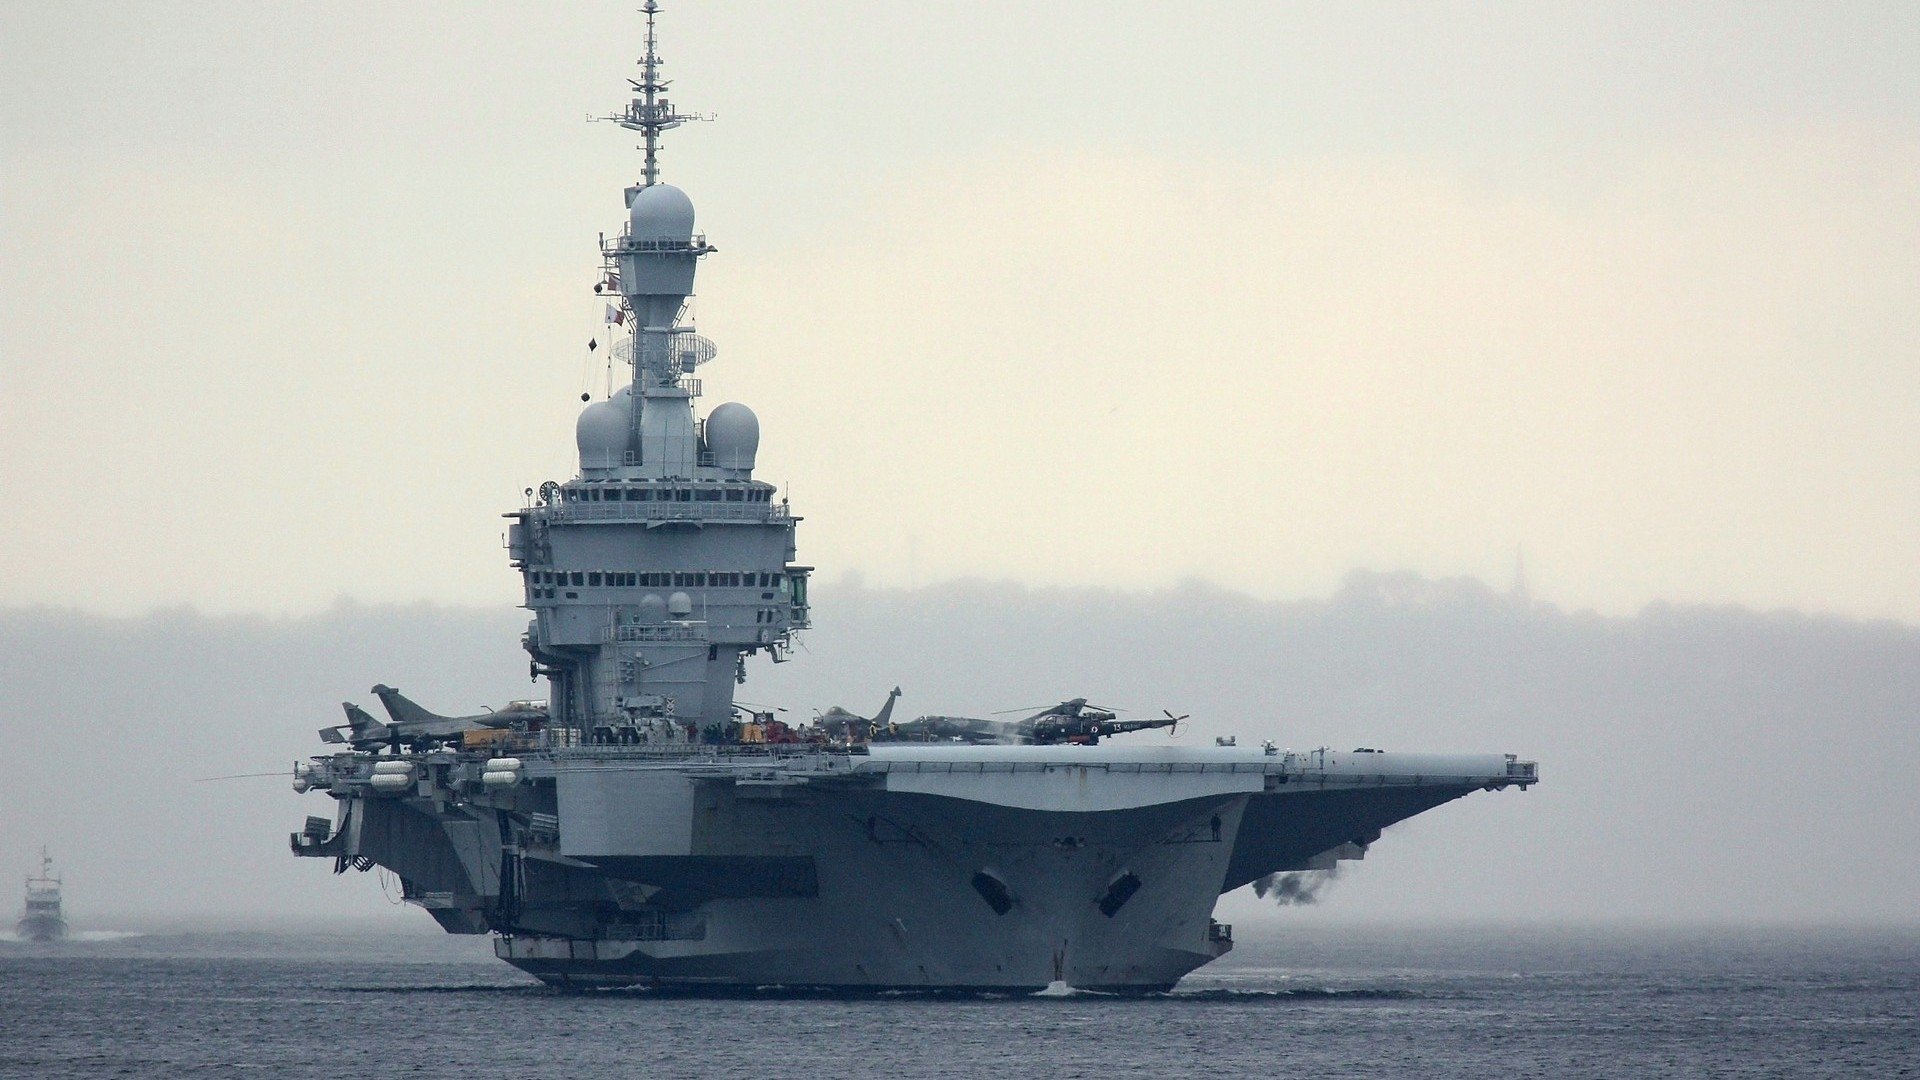 French Aircraft Carrier Charles De Gaulle (R91) Backgrounds, Compatible - PC, Mobile, Gadgets| 1920x1080 px